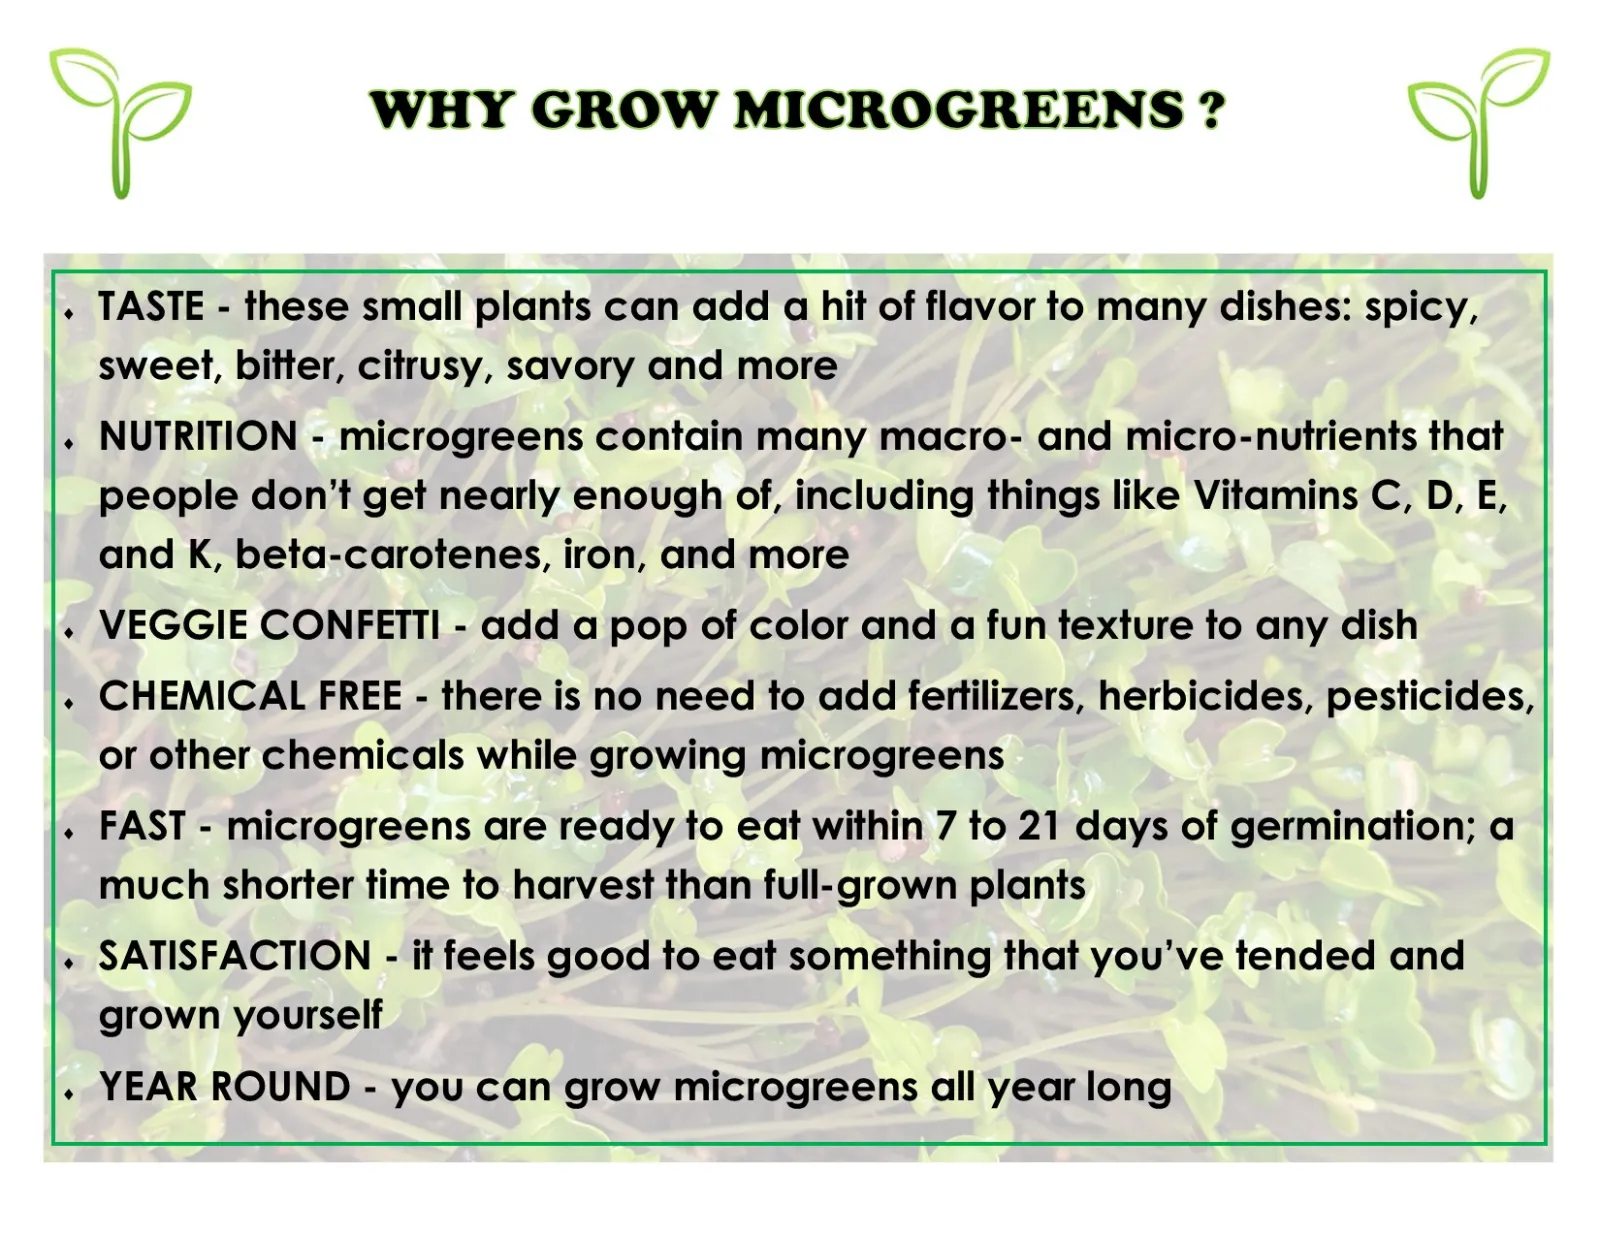 This is a wall of text about why you should grow microgreens